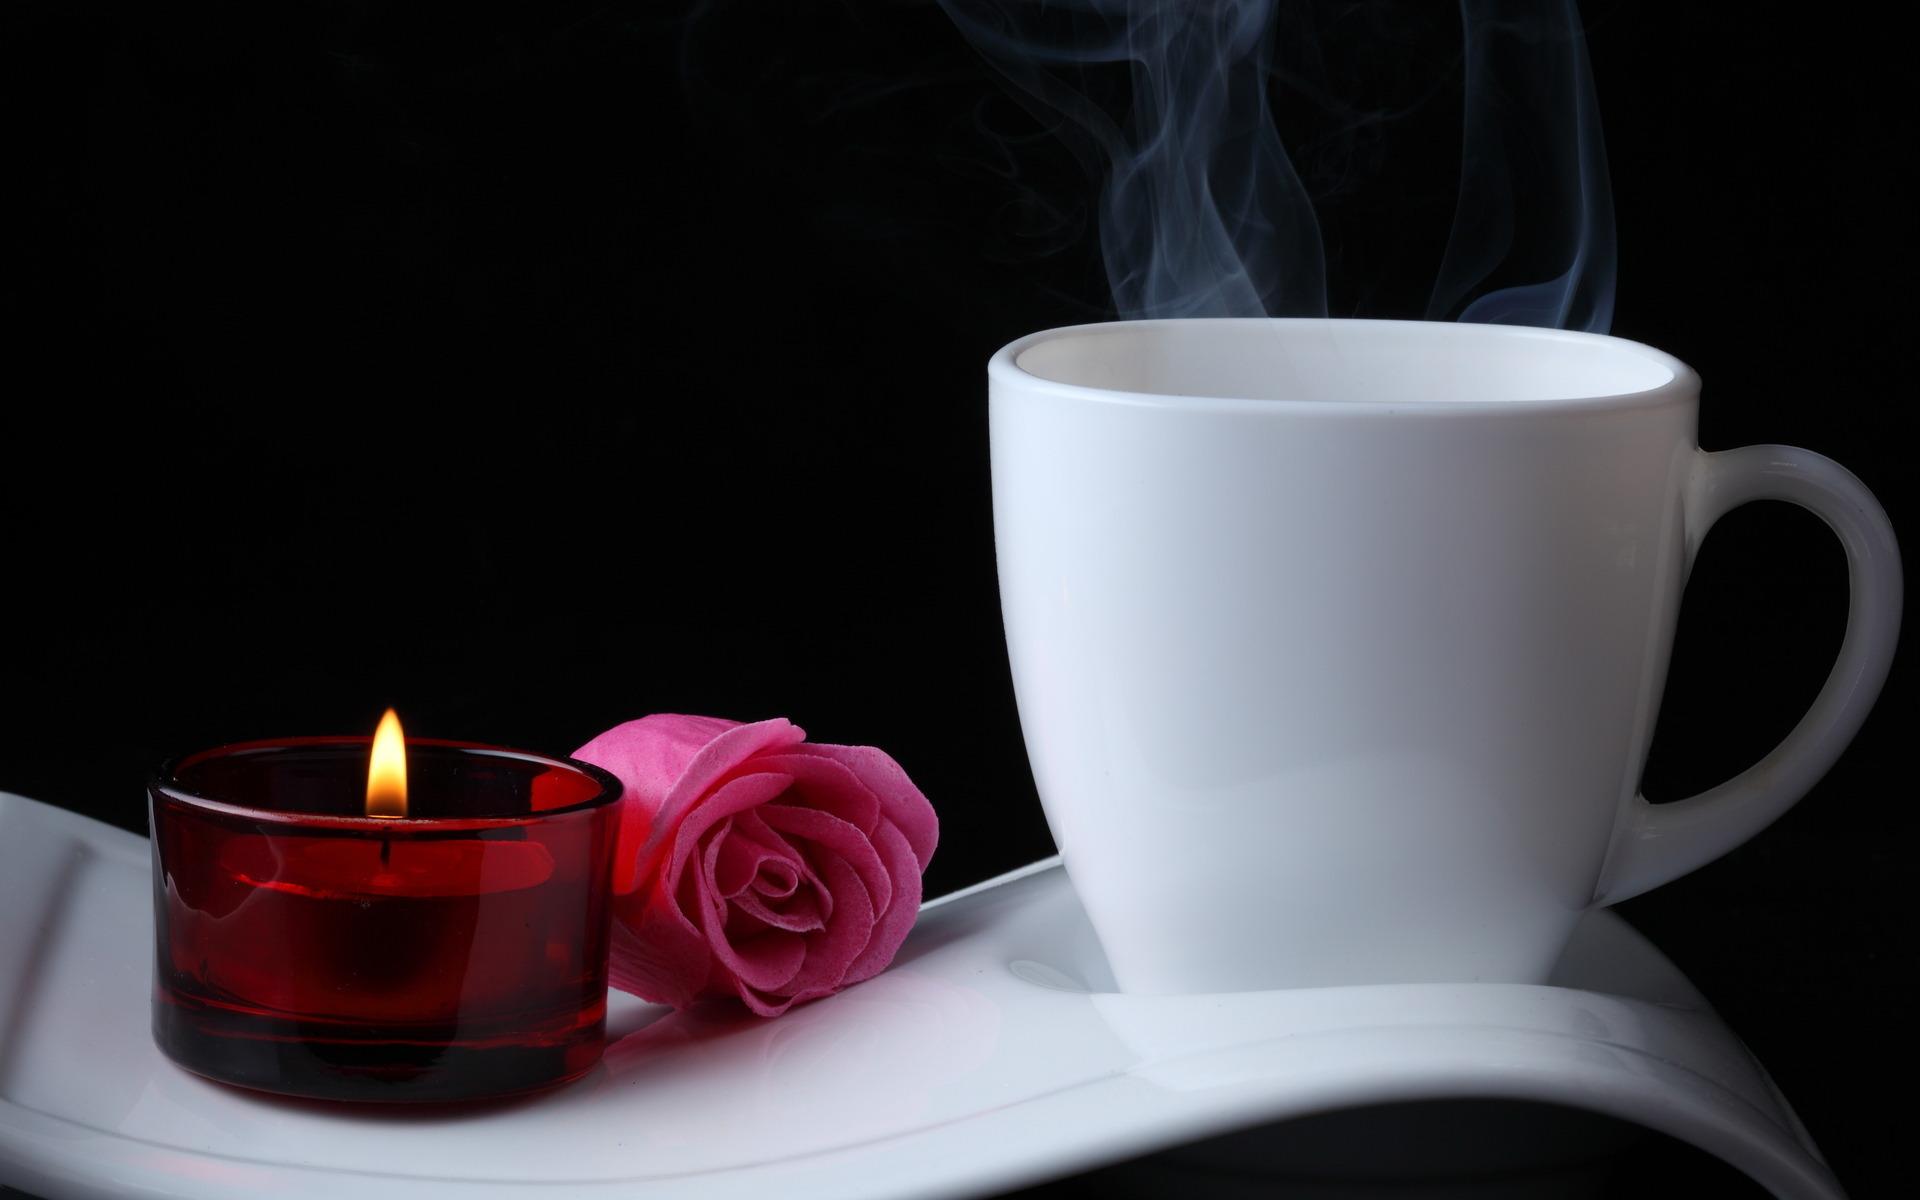 Hot Coffee, Pink Rose and Candle widescreen wallpaper. Wide